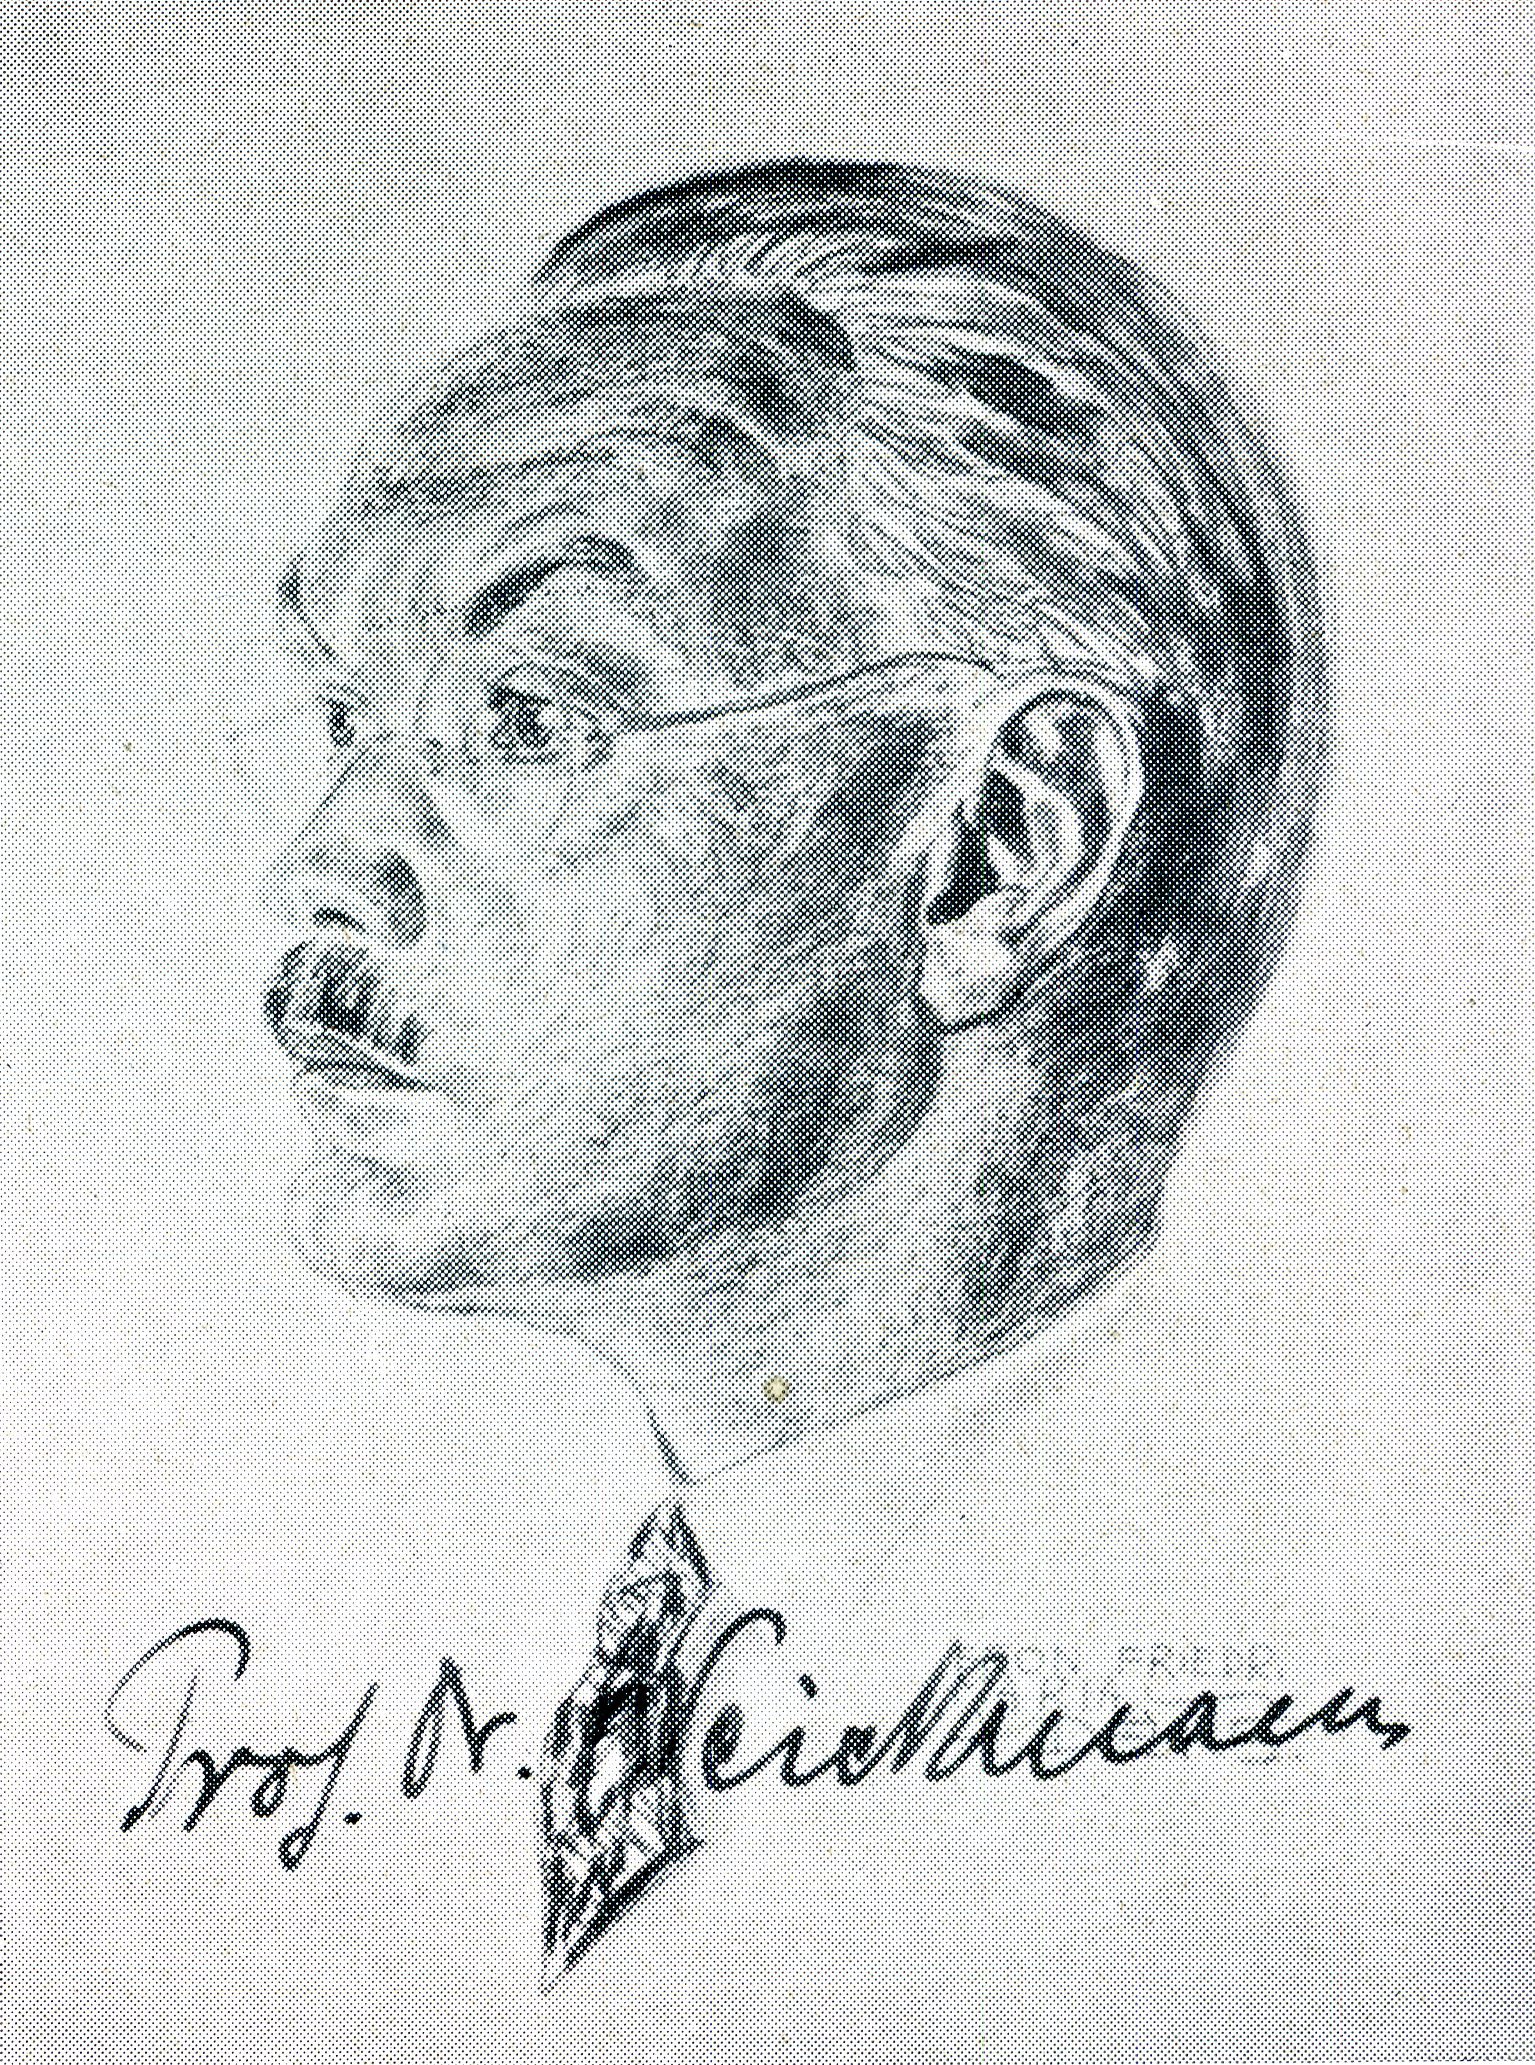 Prof. Dr. Ludwig Weickmann (1882 – 1961) (Zeppelin Museum CC BY-NC-SA)